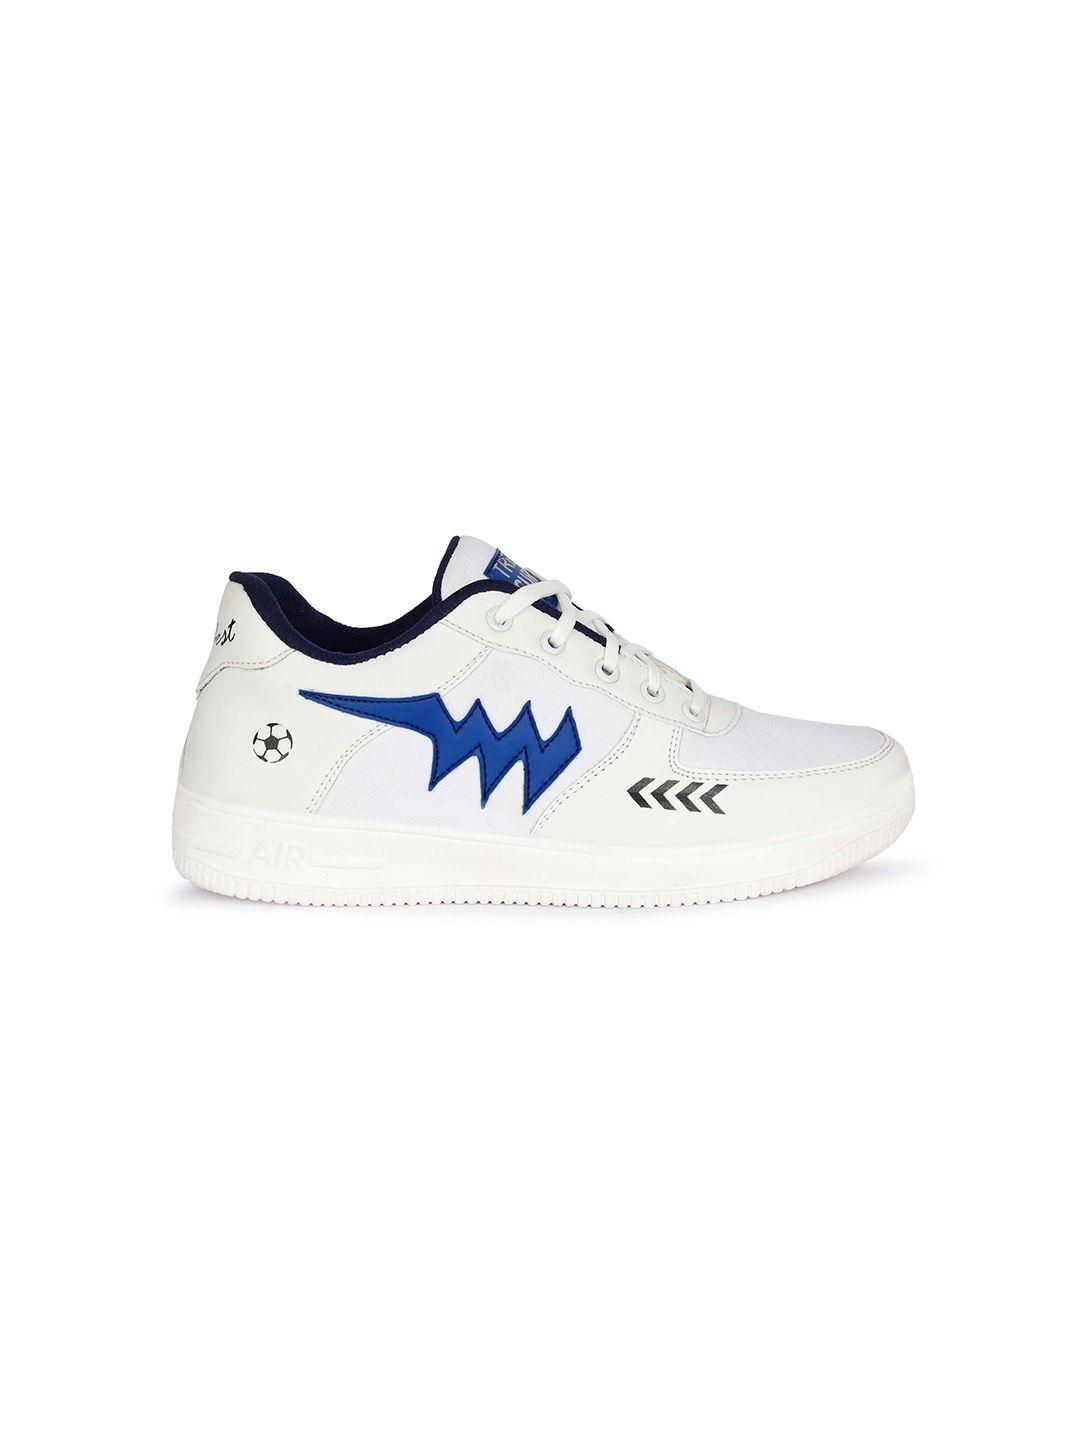 Aadi Men's Synthetic Leather Blue & White Casual Shoes